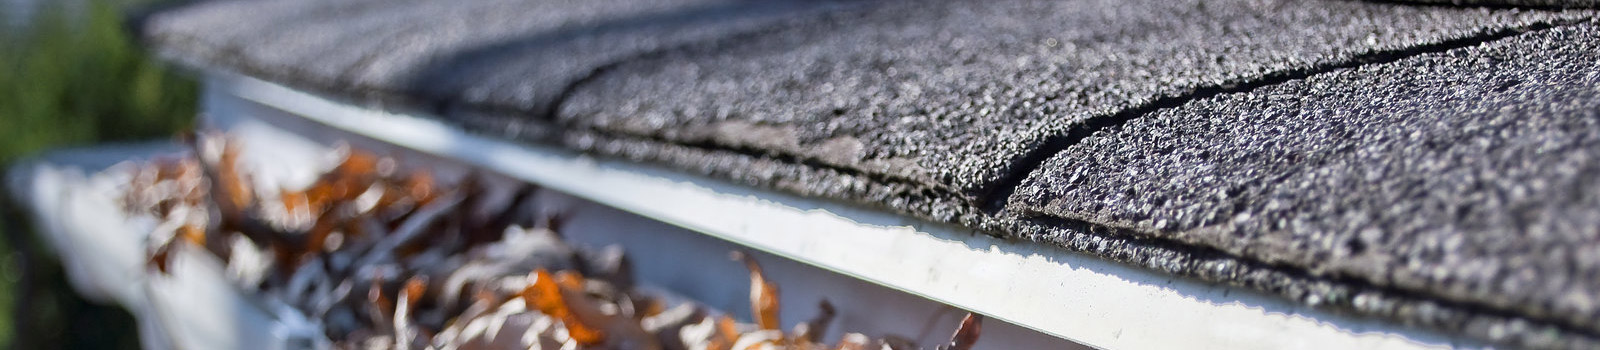 Idaho roofing services for residential roof repairs, replacements and inspections.